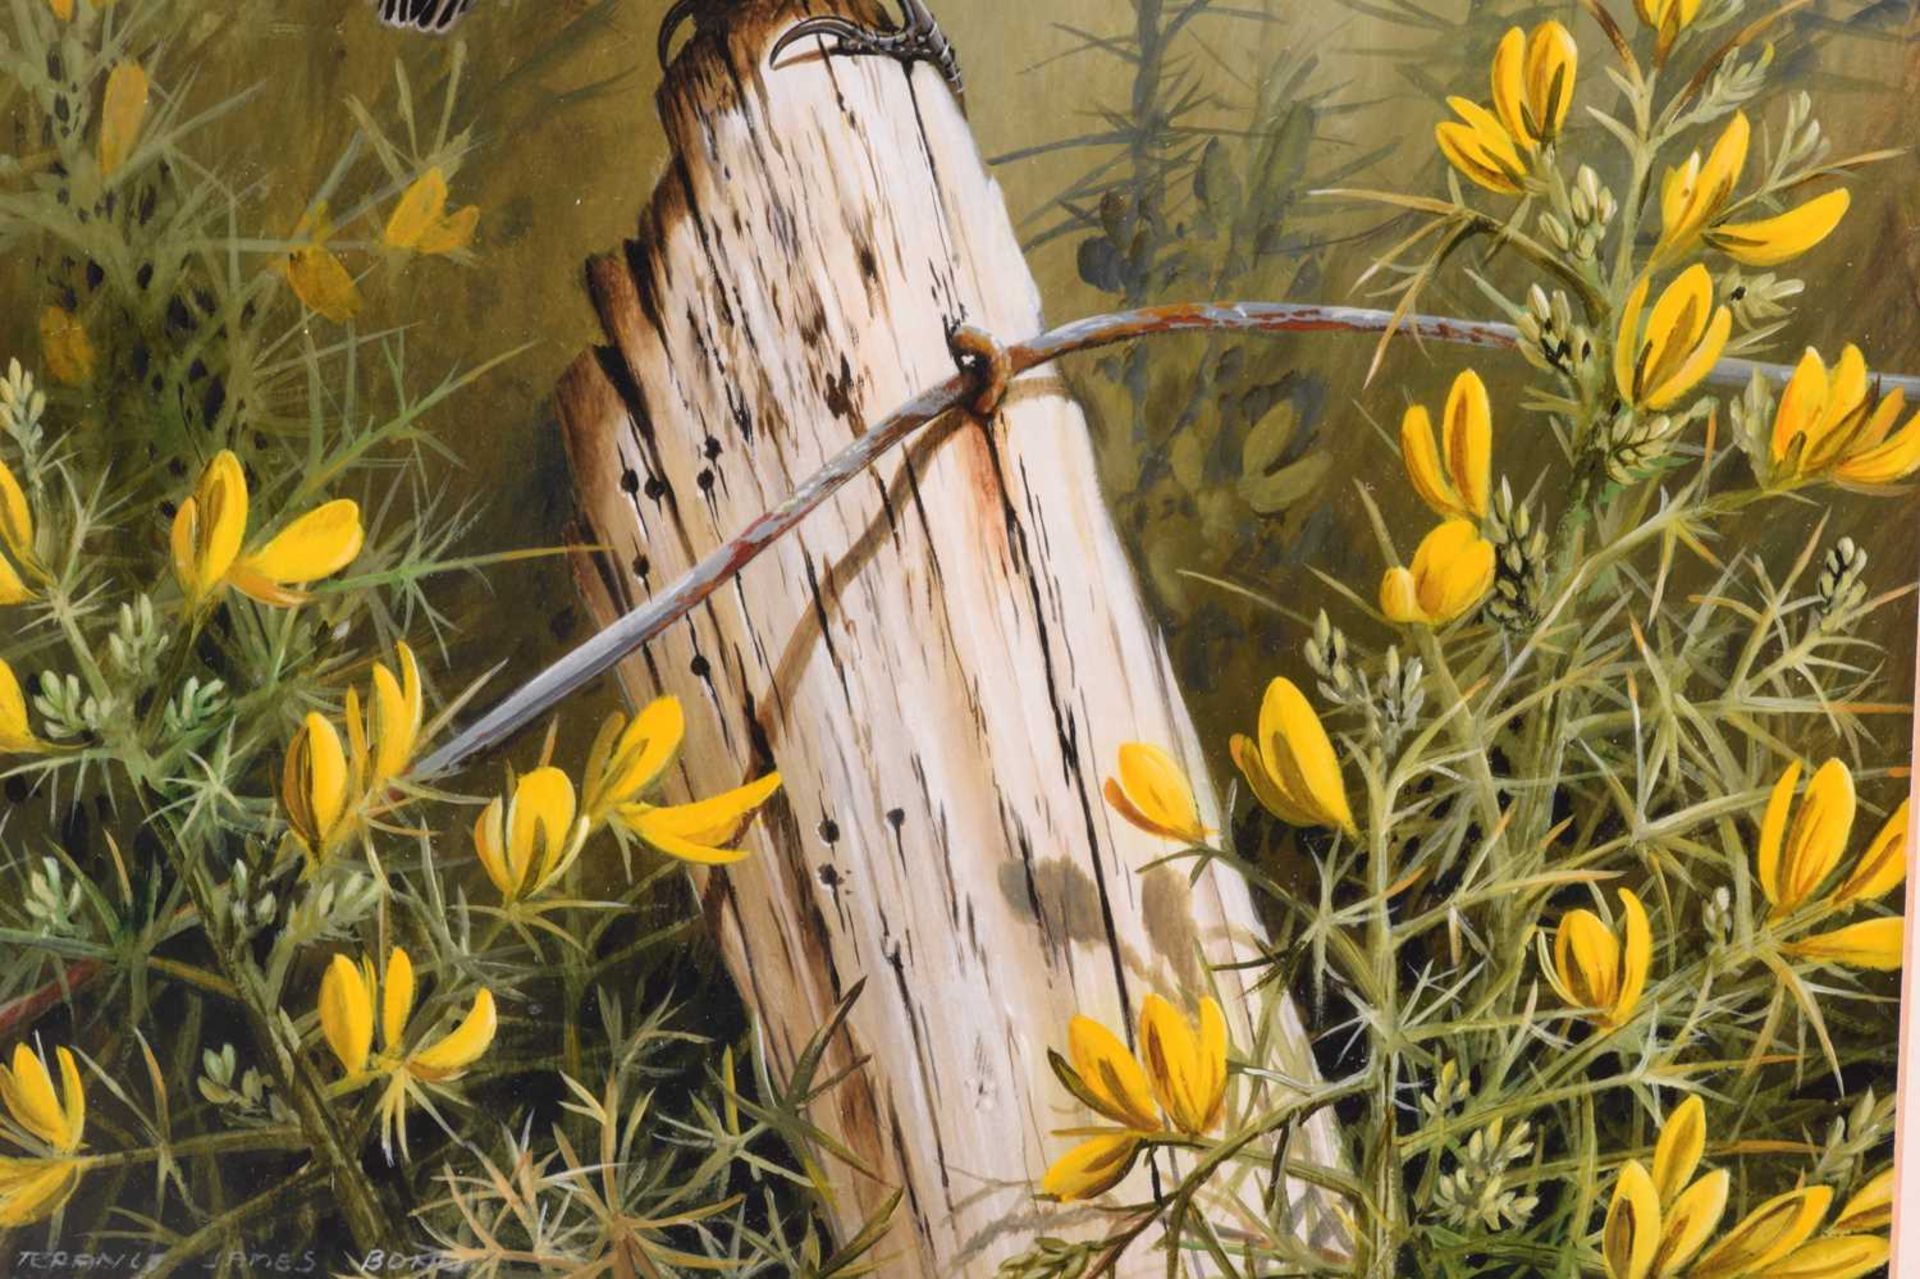 Terance James Bond (b.1946) British, 'European Stonechat', the bird perched on a stump before yellow - Image 6 of 7